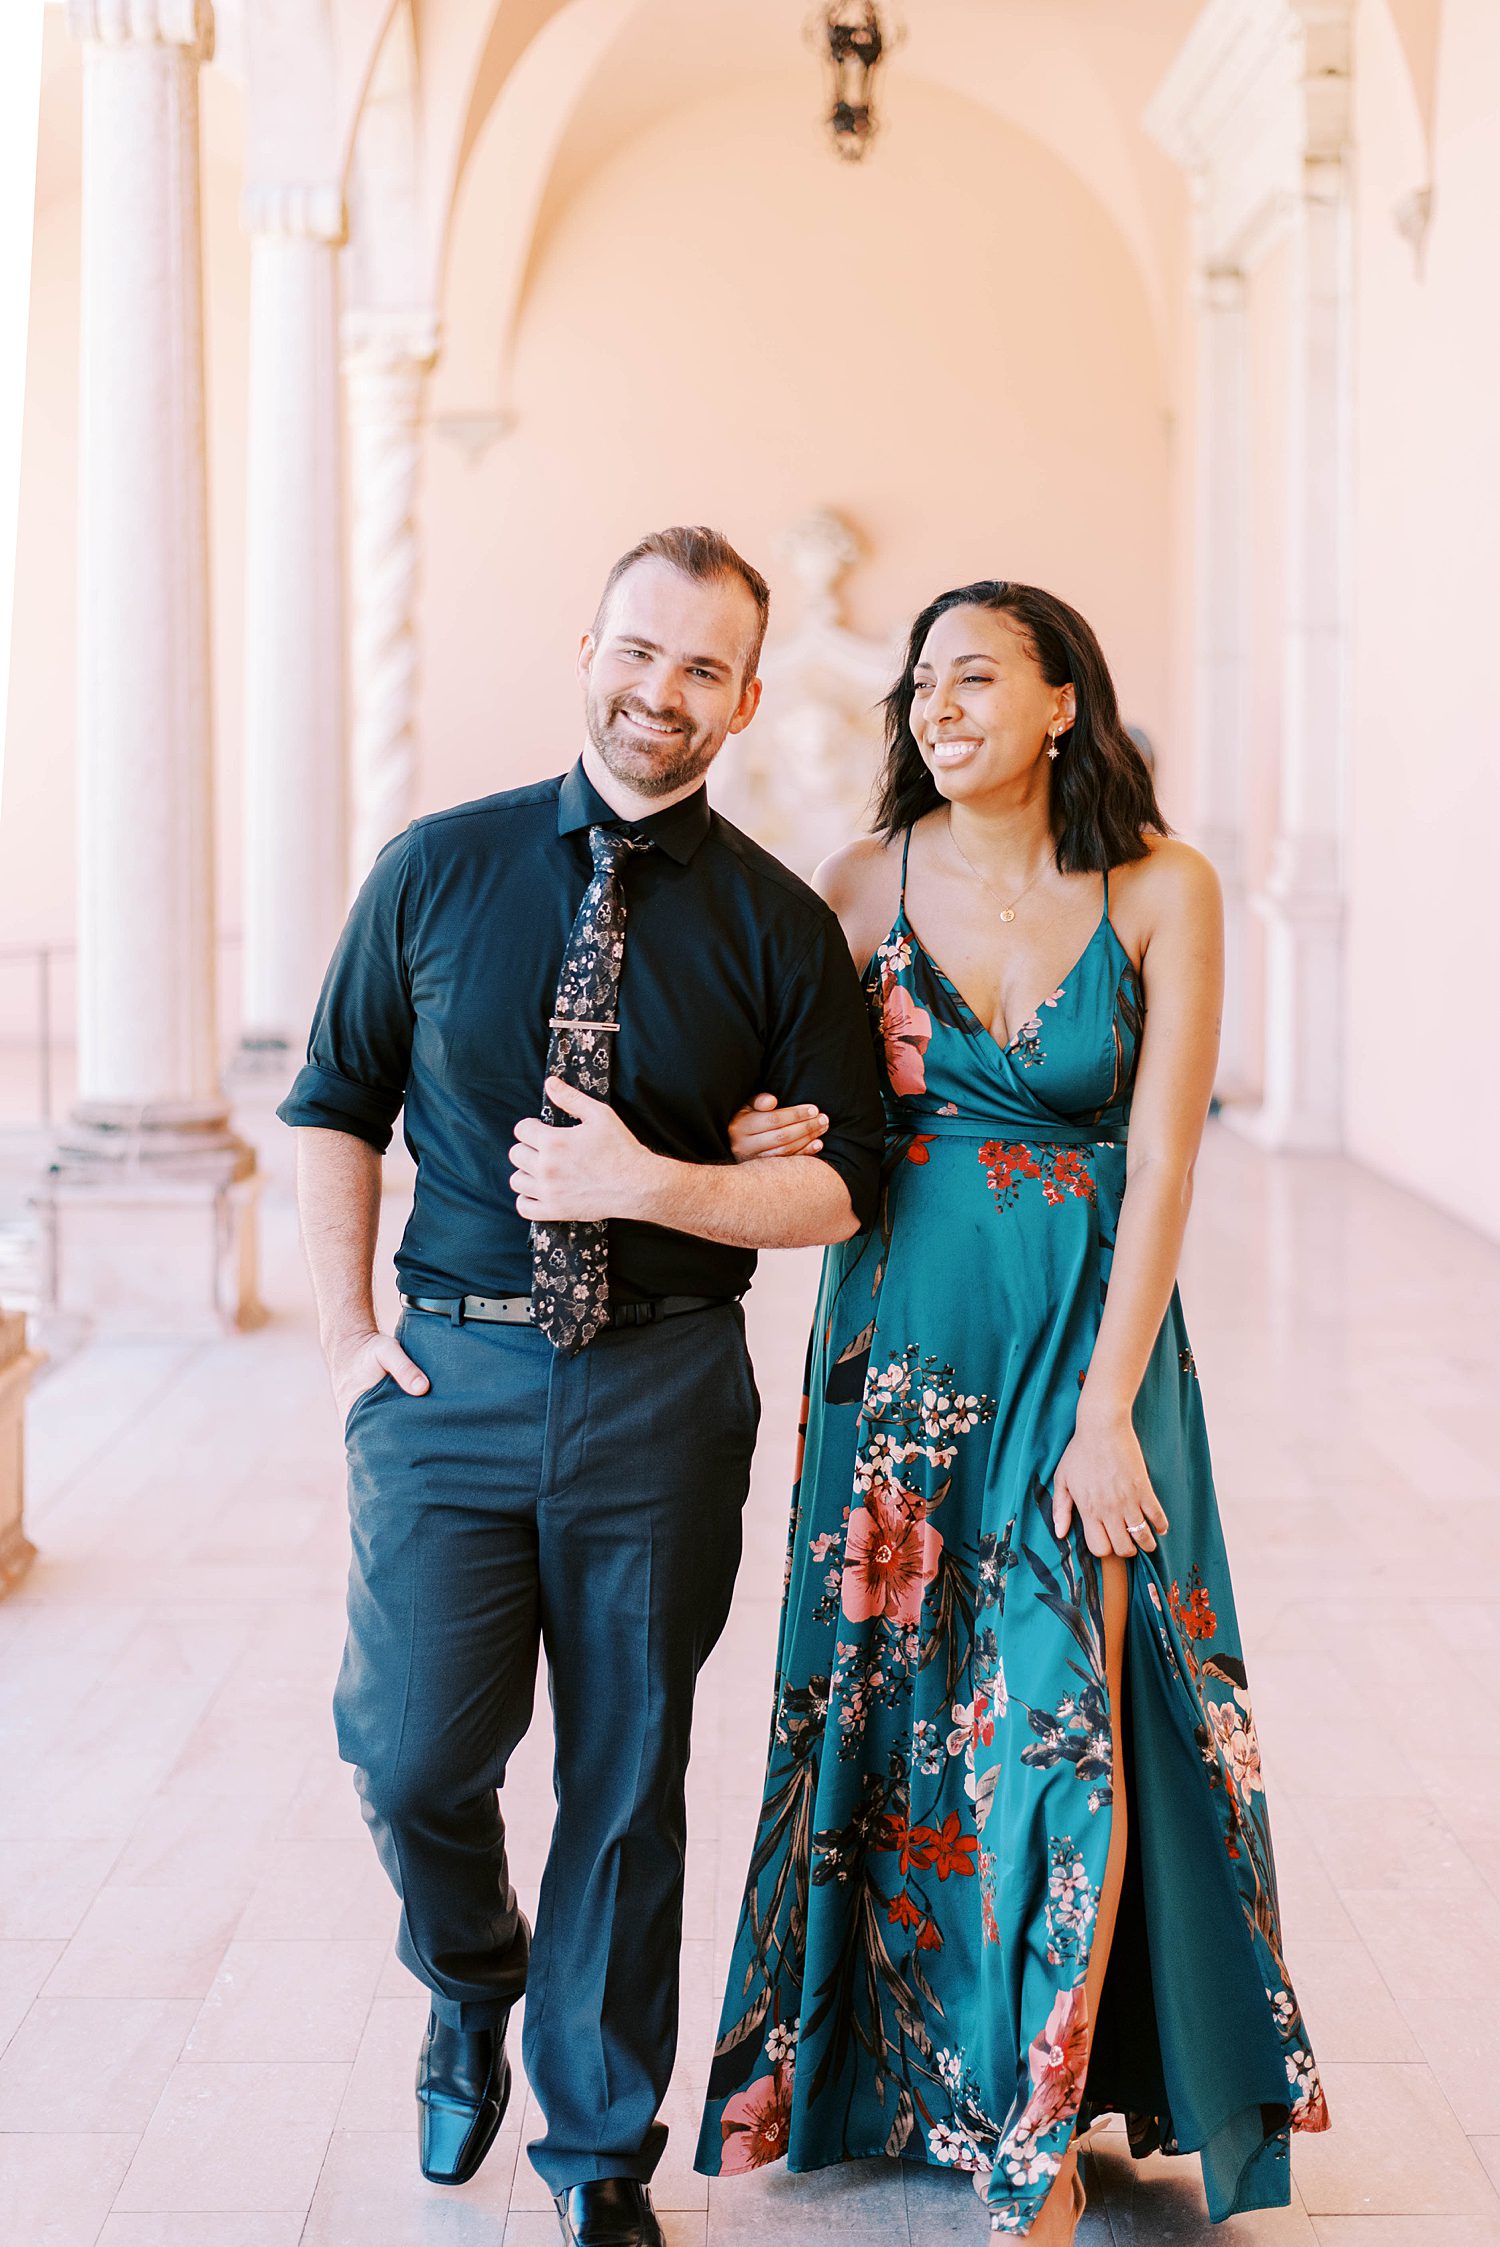 man walks with woman on his arm during portraits at the Ringling Museum